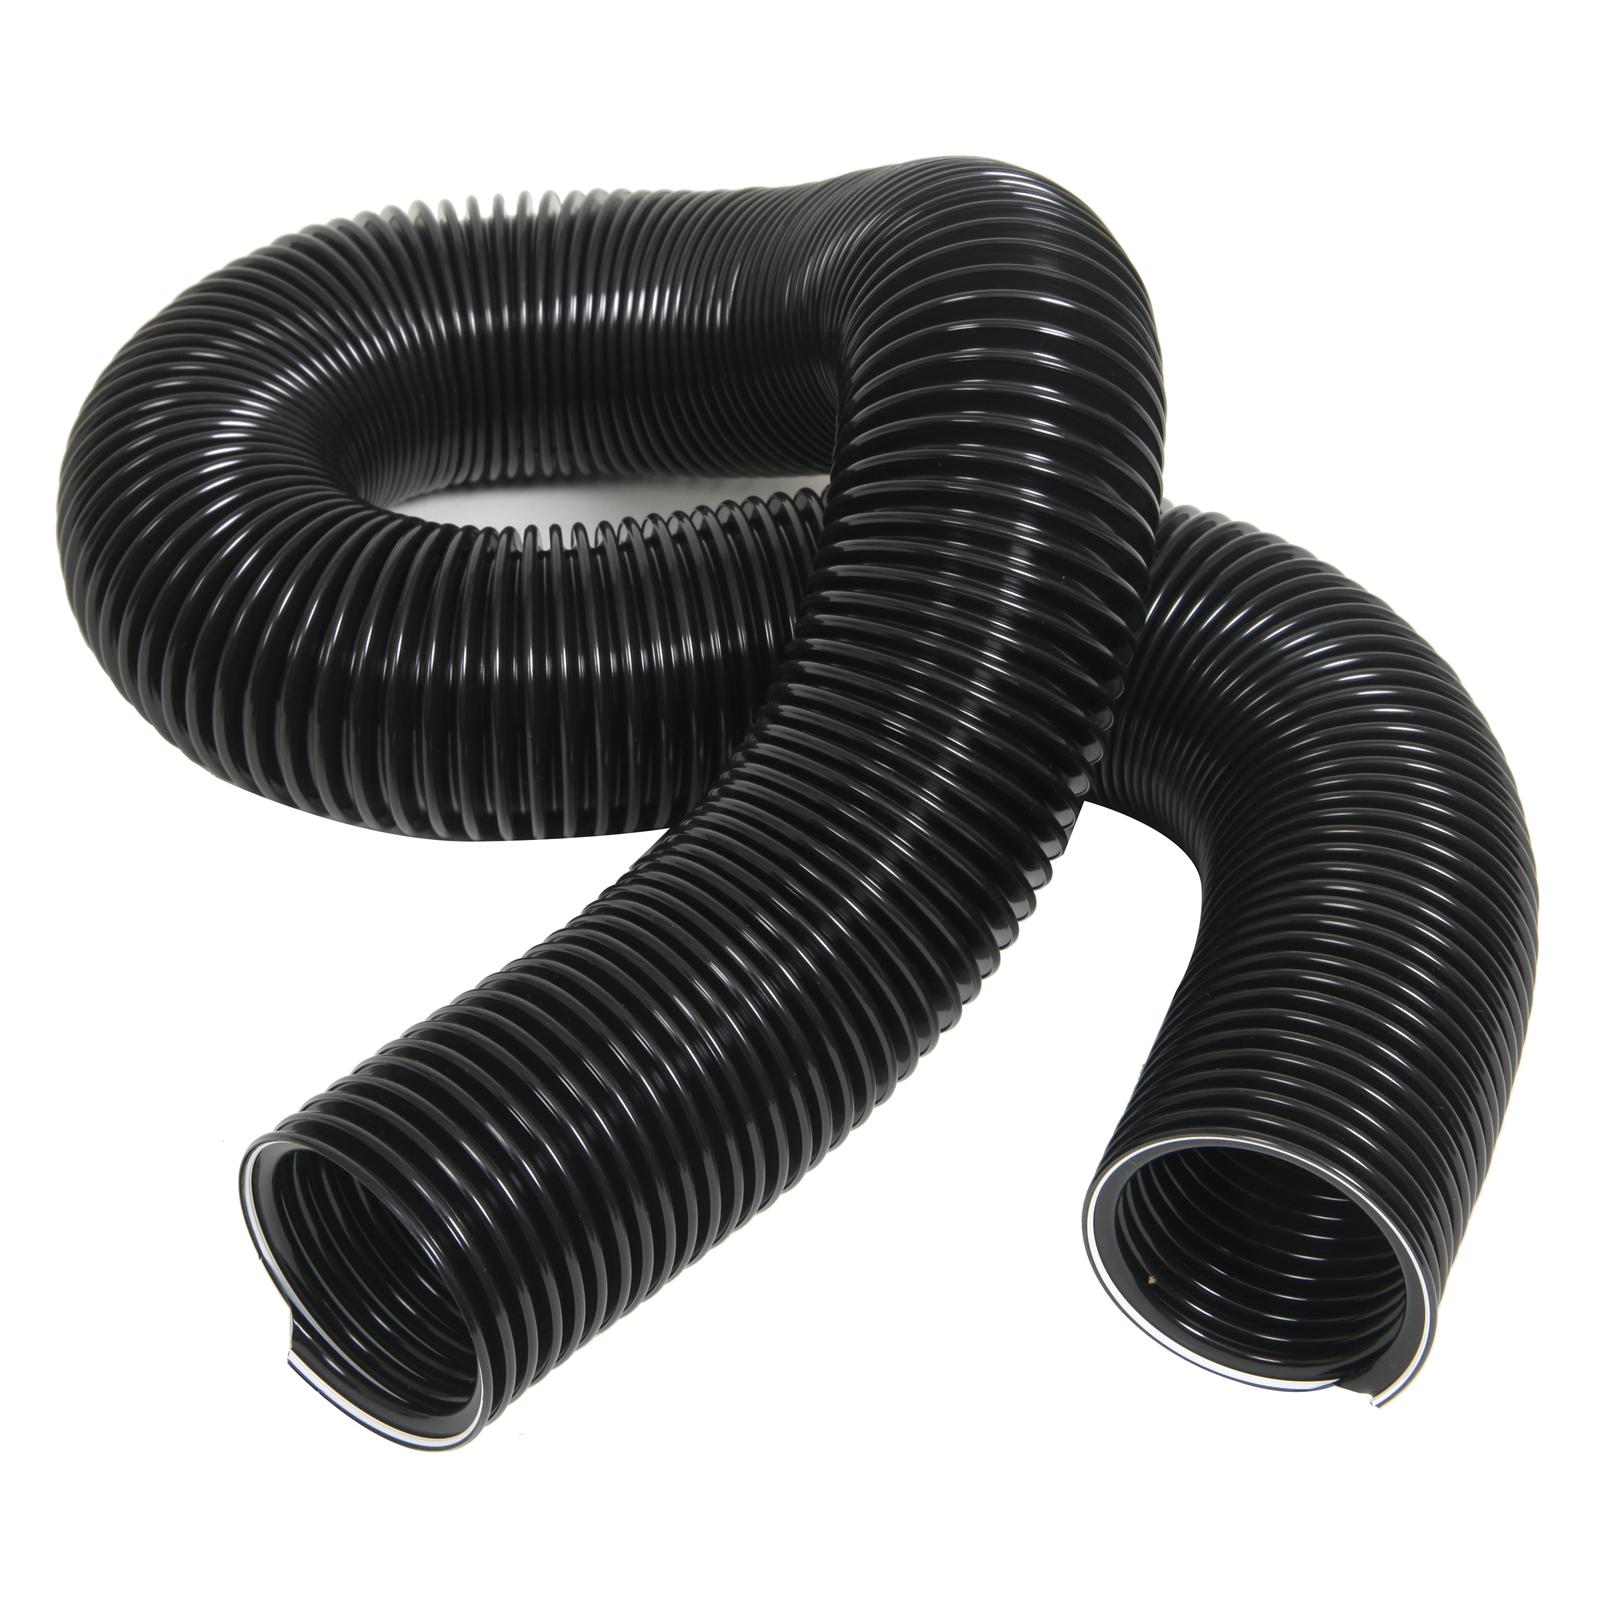 Dayco 80170 Dayco Autoflex Defroster Duct Hoses | Summit Racing